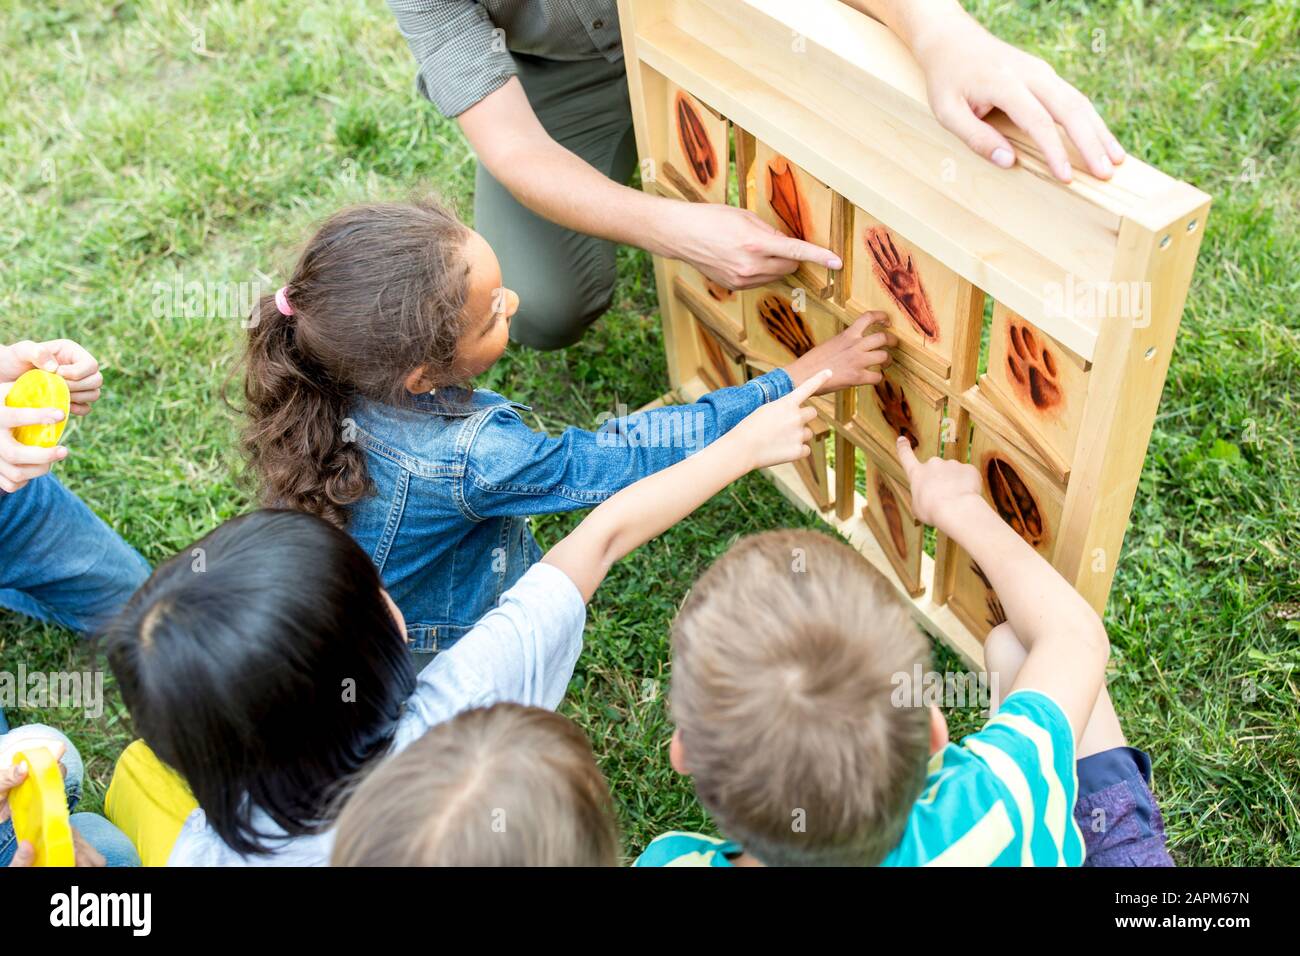 School children learning to recognize different animal feet Stock Photo